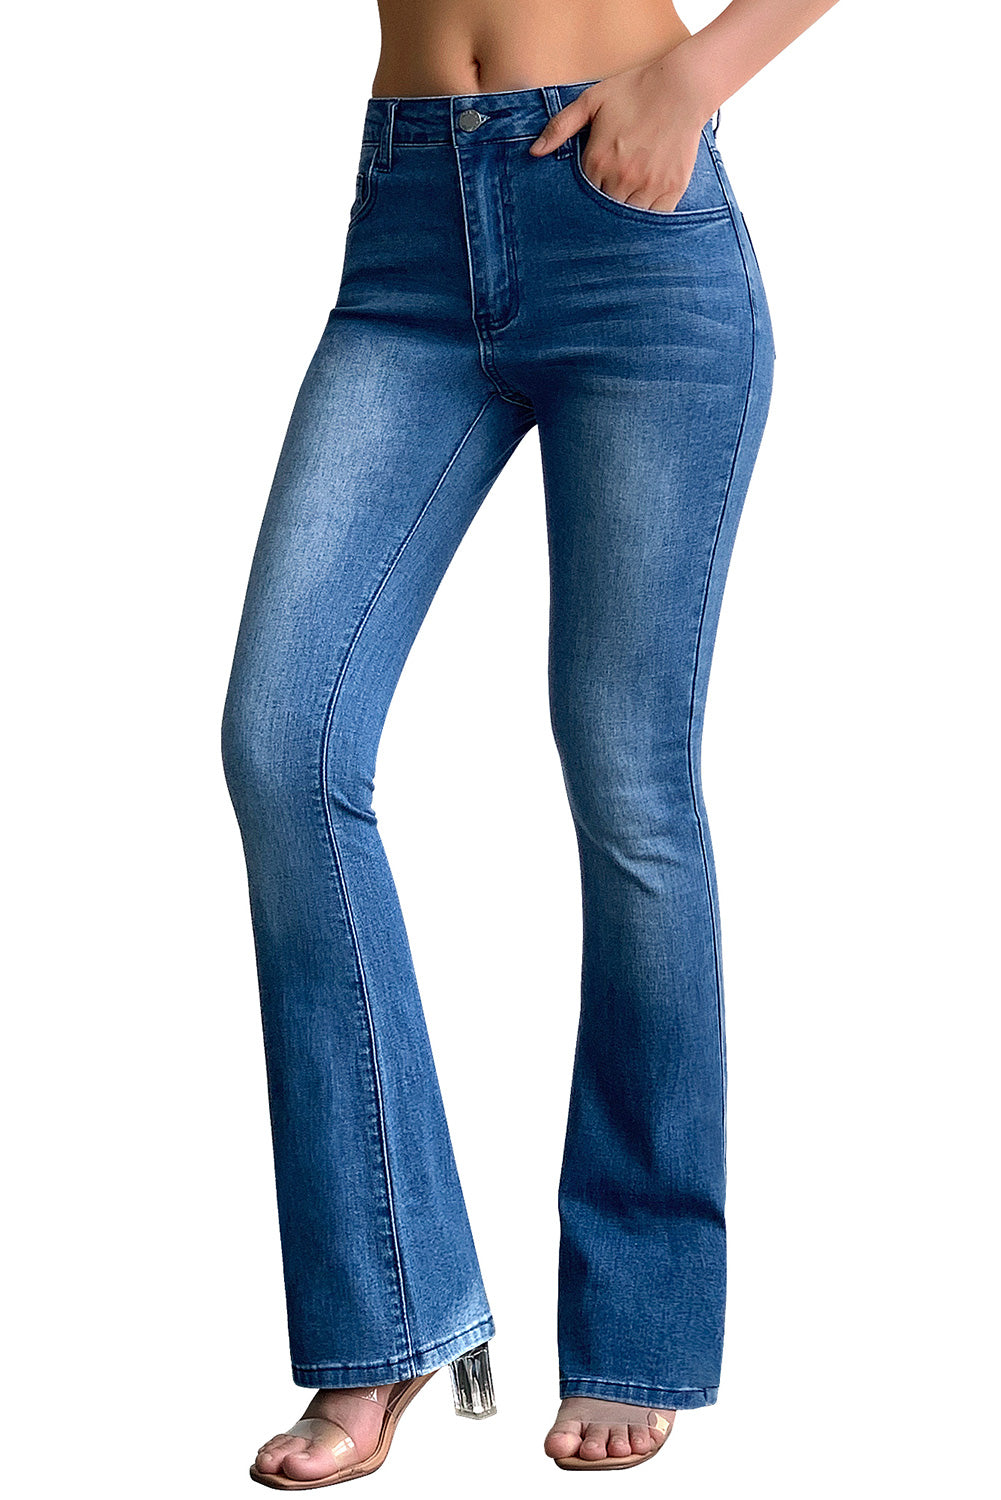 roswear Women's Skinny Bell Bottom Jeans High Waisted Stretch Tummy Control Flared  Jeans Long Denim Pants 104 Blue Small at  Women's Jeans store